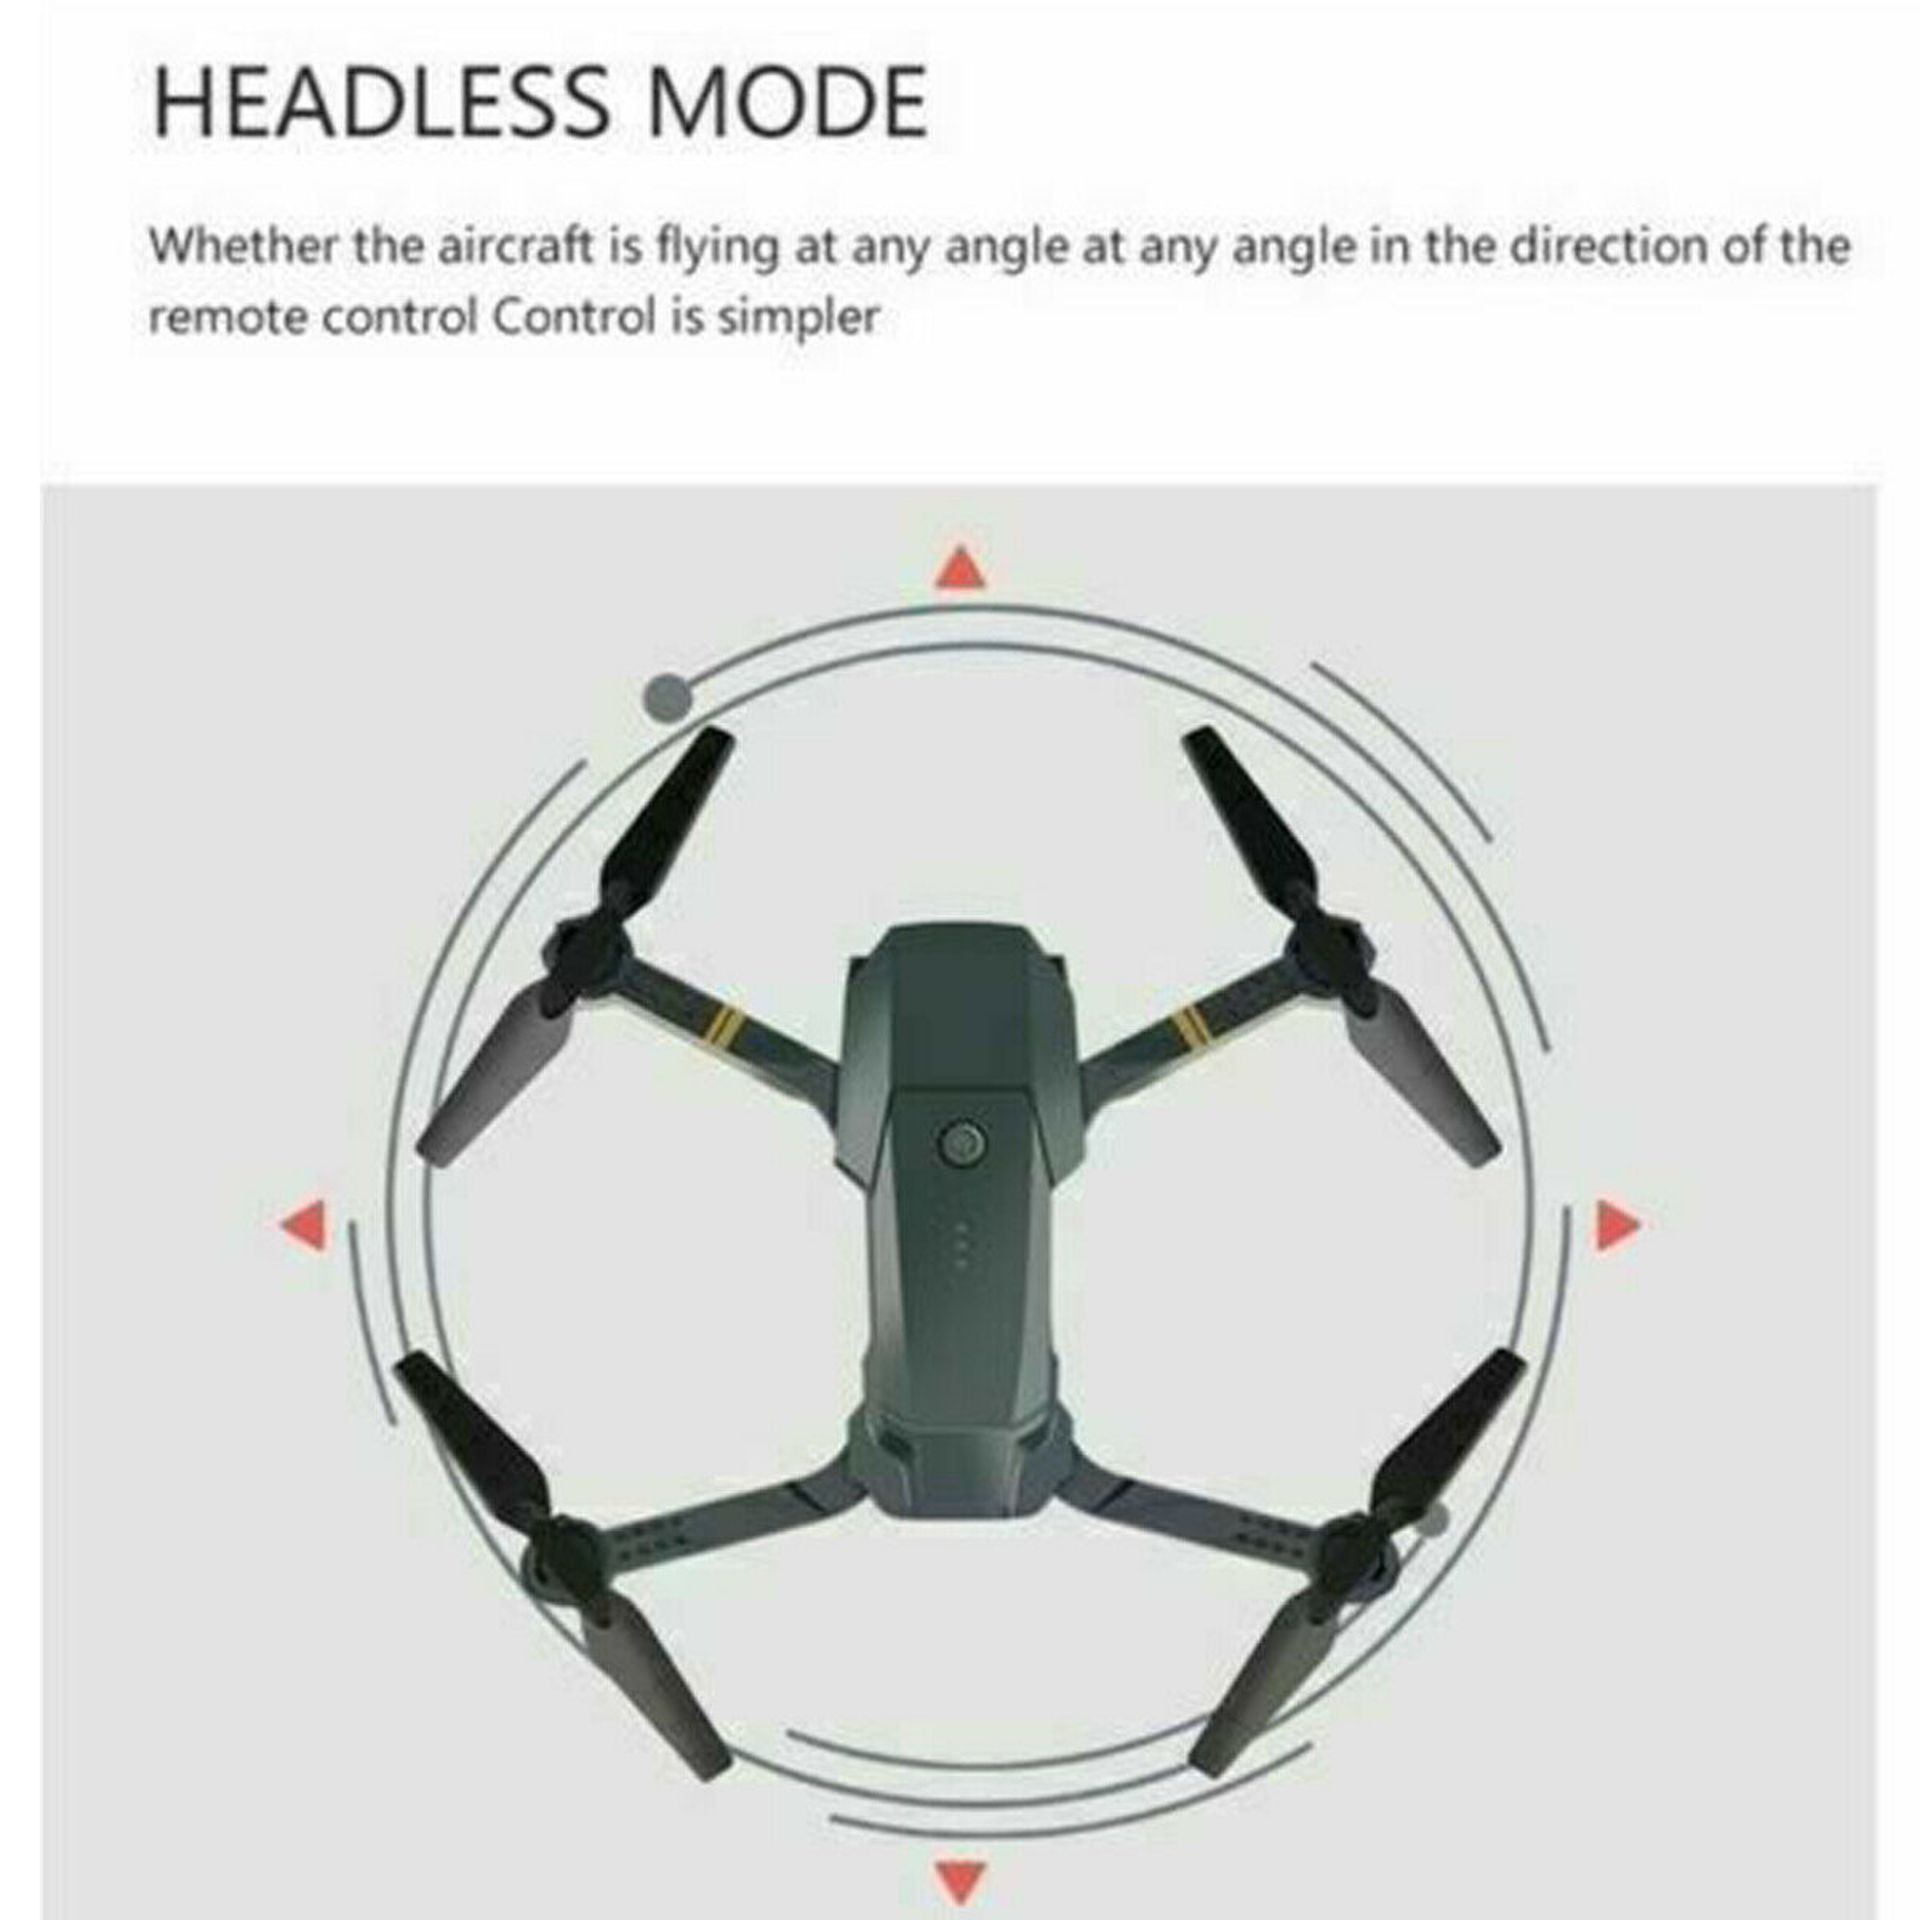 NEW & UNUSED DRONE X PRO WIFI FPV 1080p HD CAMERA FOLDABLE RC QUADCOPTER + CASE/ BAG *NO VAT* - Image 4 of 11